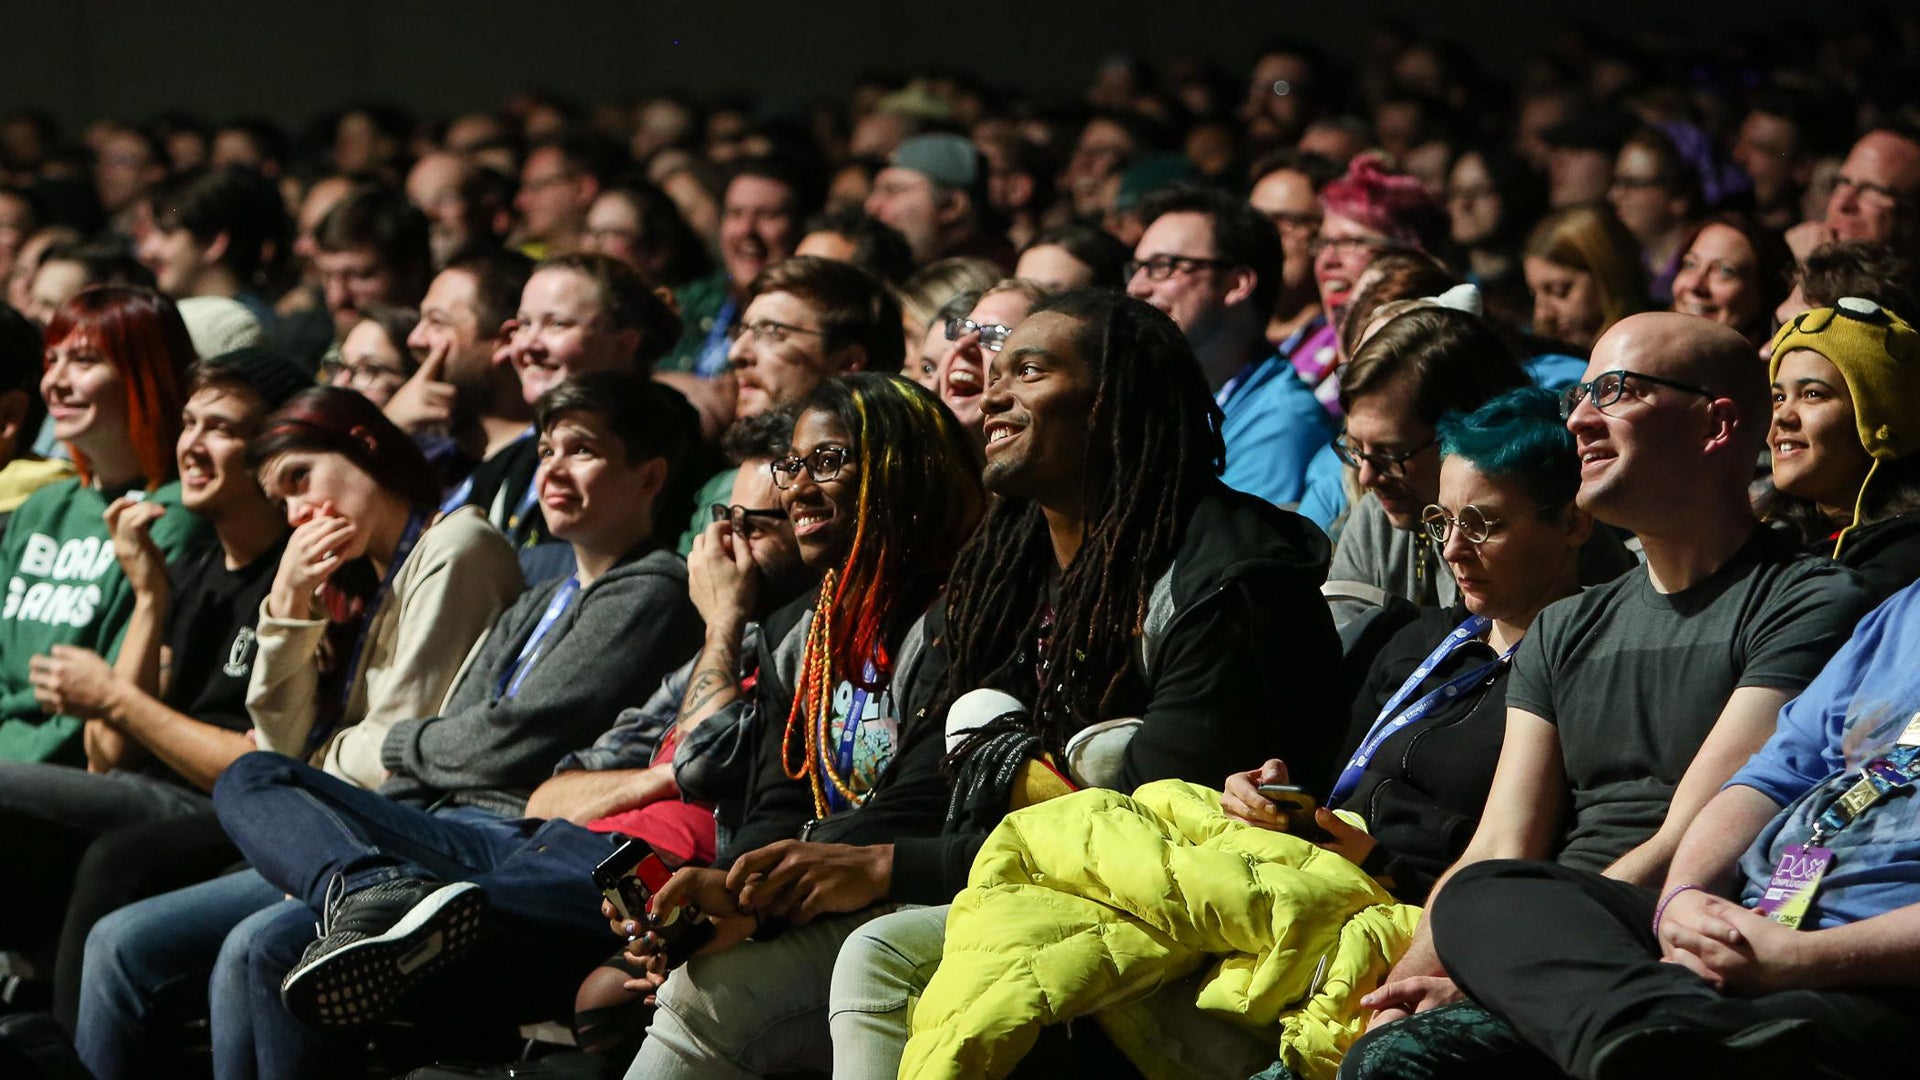 A panel audience at PAX.